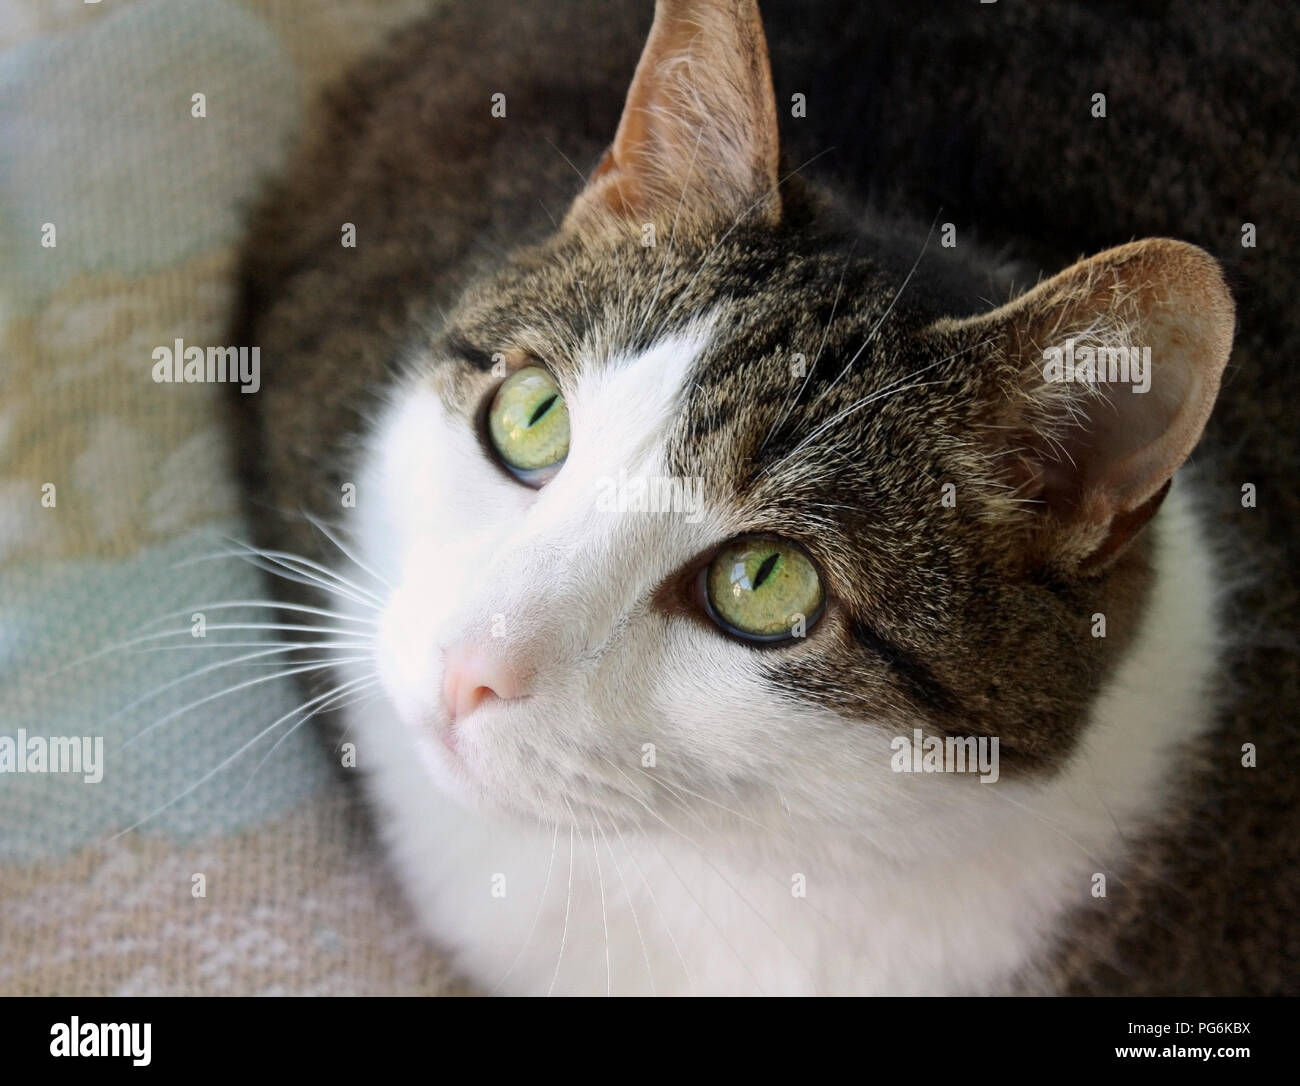 Beautiful cat with bright green eyes looking up Stock Photo